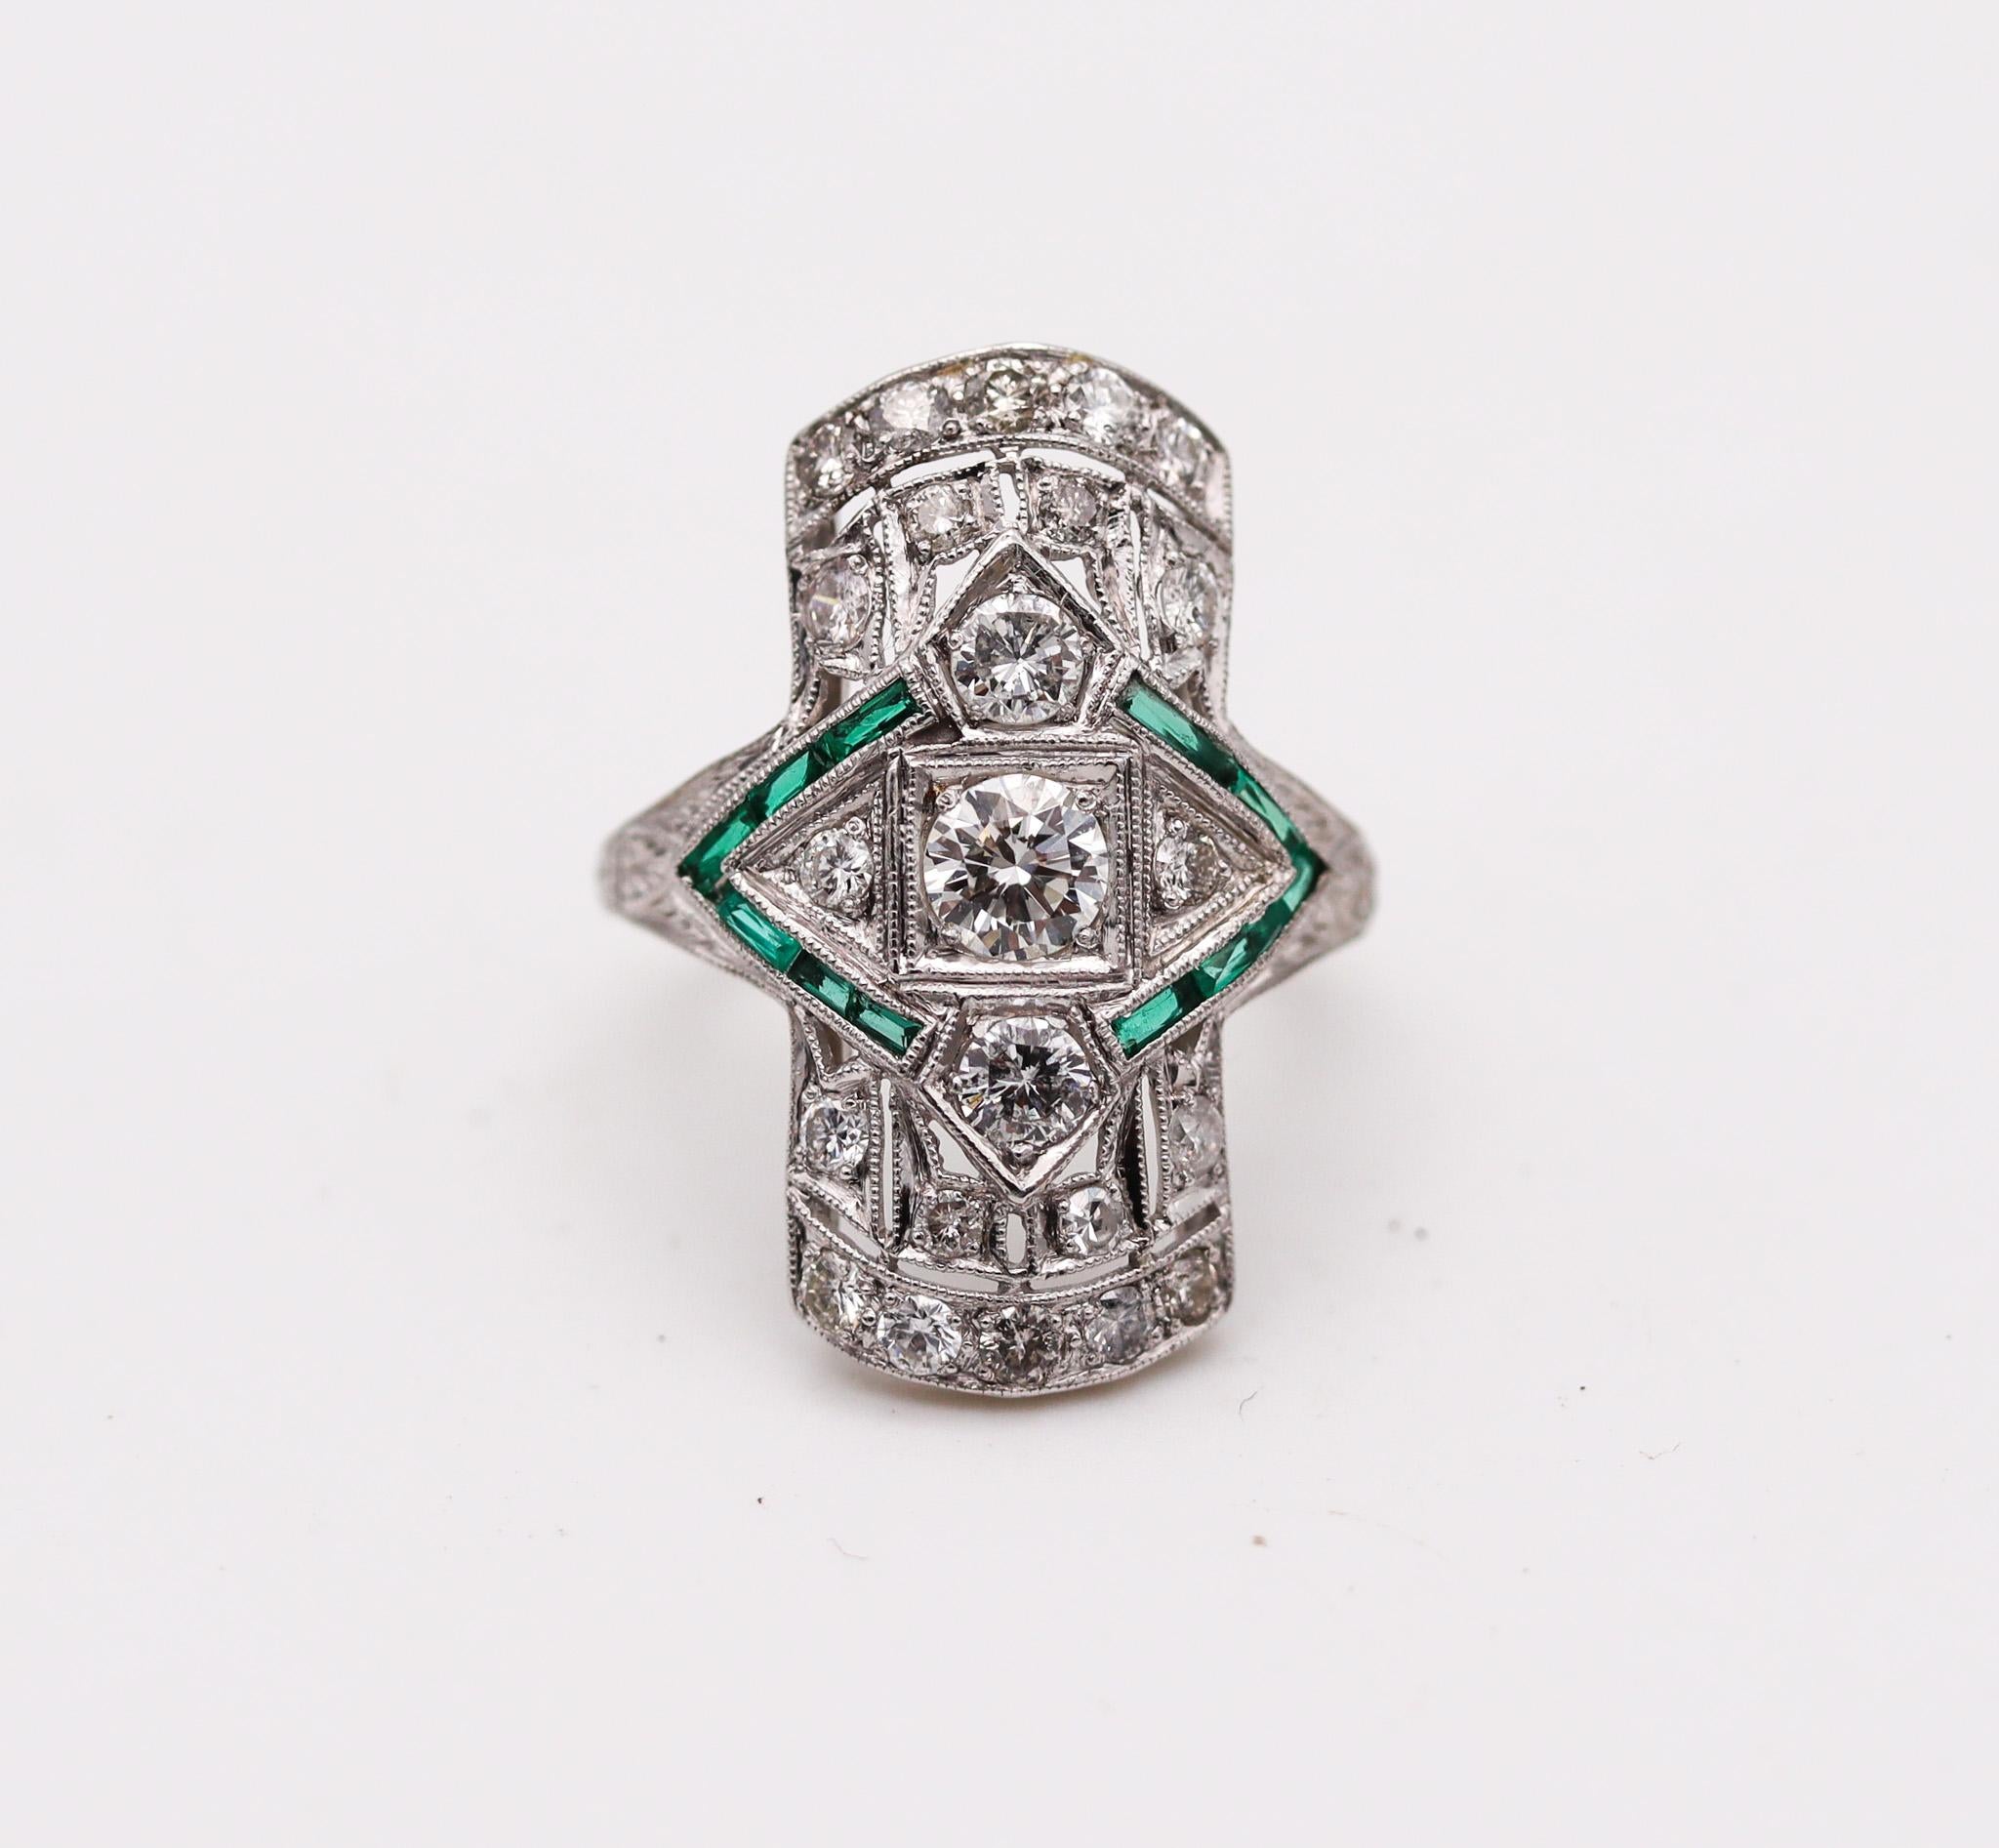 An art deco platinum ring.

Stunning art deco cocktail ring, created in America back in the 1930. This beautiful ring was crafted in platinum and iridium and mount with a great selection of gemstones, The stones settings are finished with millegrain